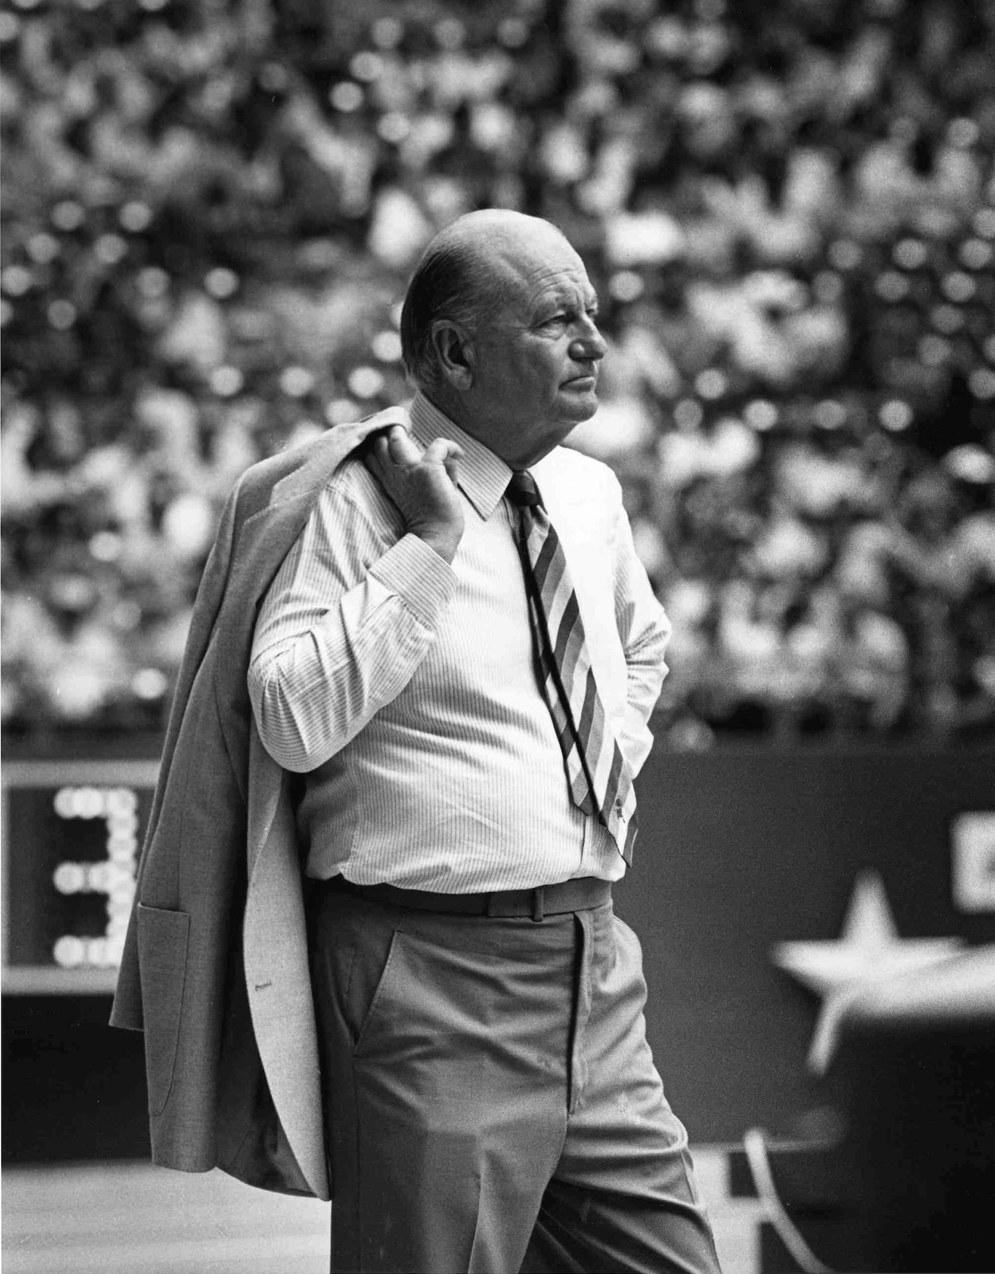 
Dallas Cowboys President Tex Schramm on the sidelines during a 27-13 win over the Pittsburgh Steelers on October 13, 1985 at Texas Stadium in Dallas, Texas. (AP Photo/NFL Photos)
